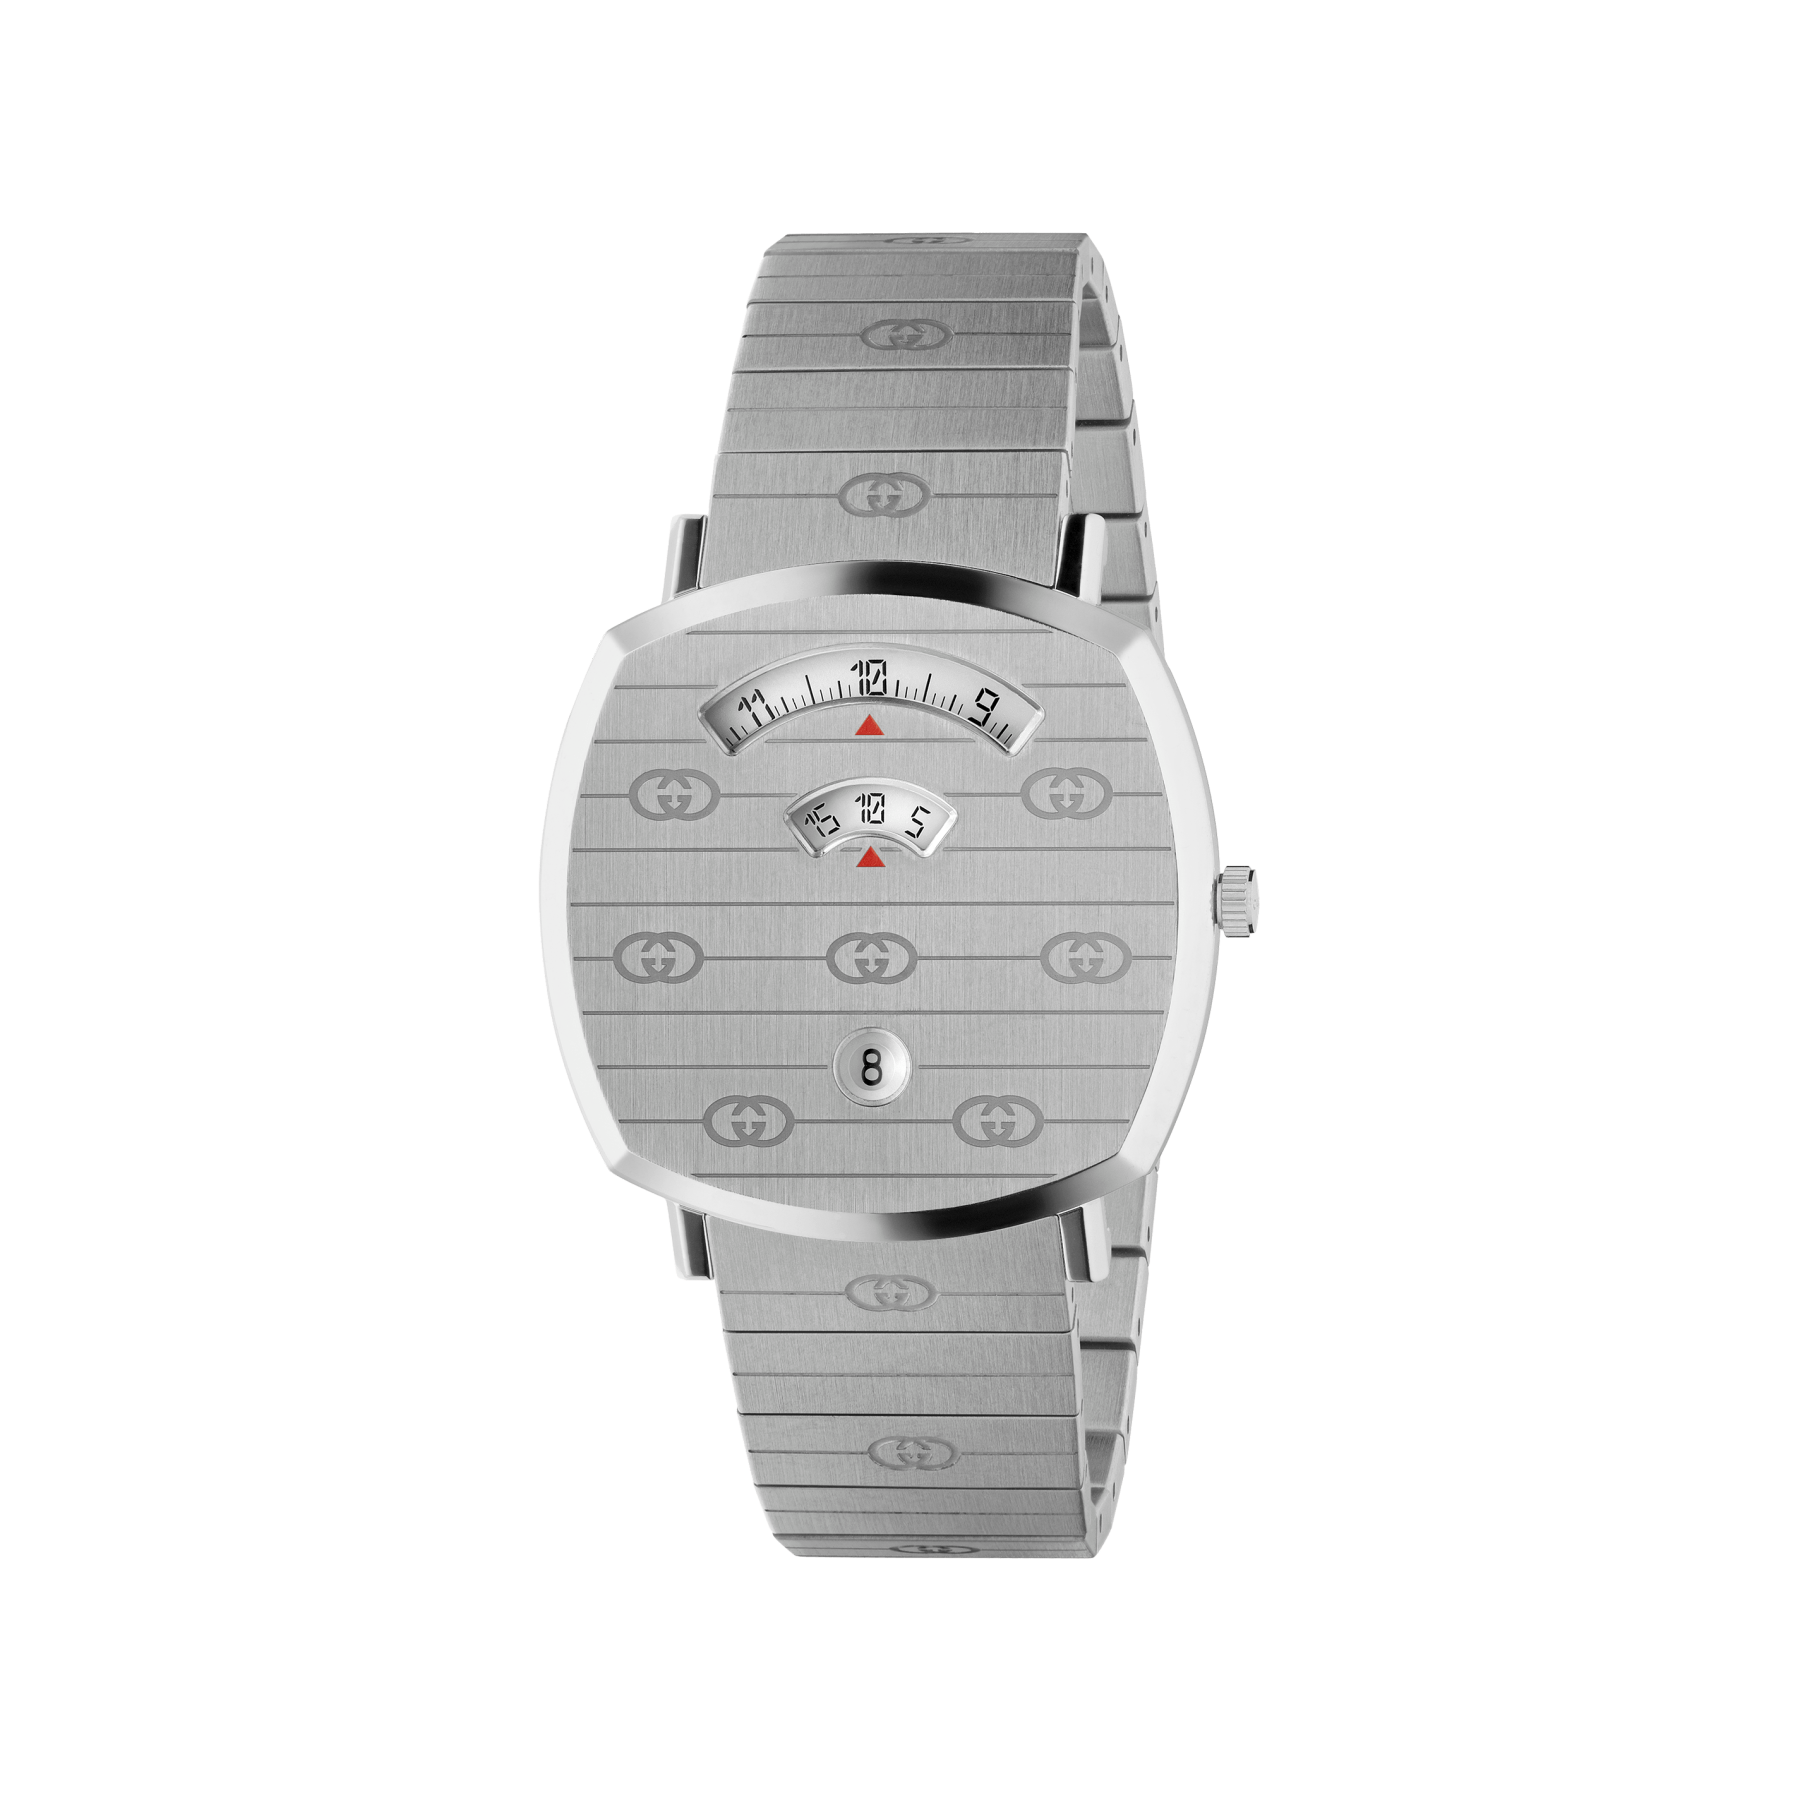 Gucci Grip Stainless Steel Watch – 35mm front view